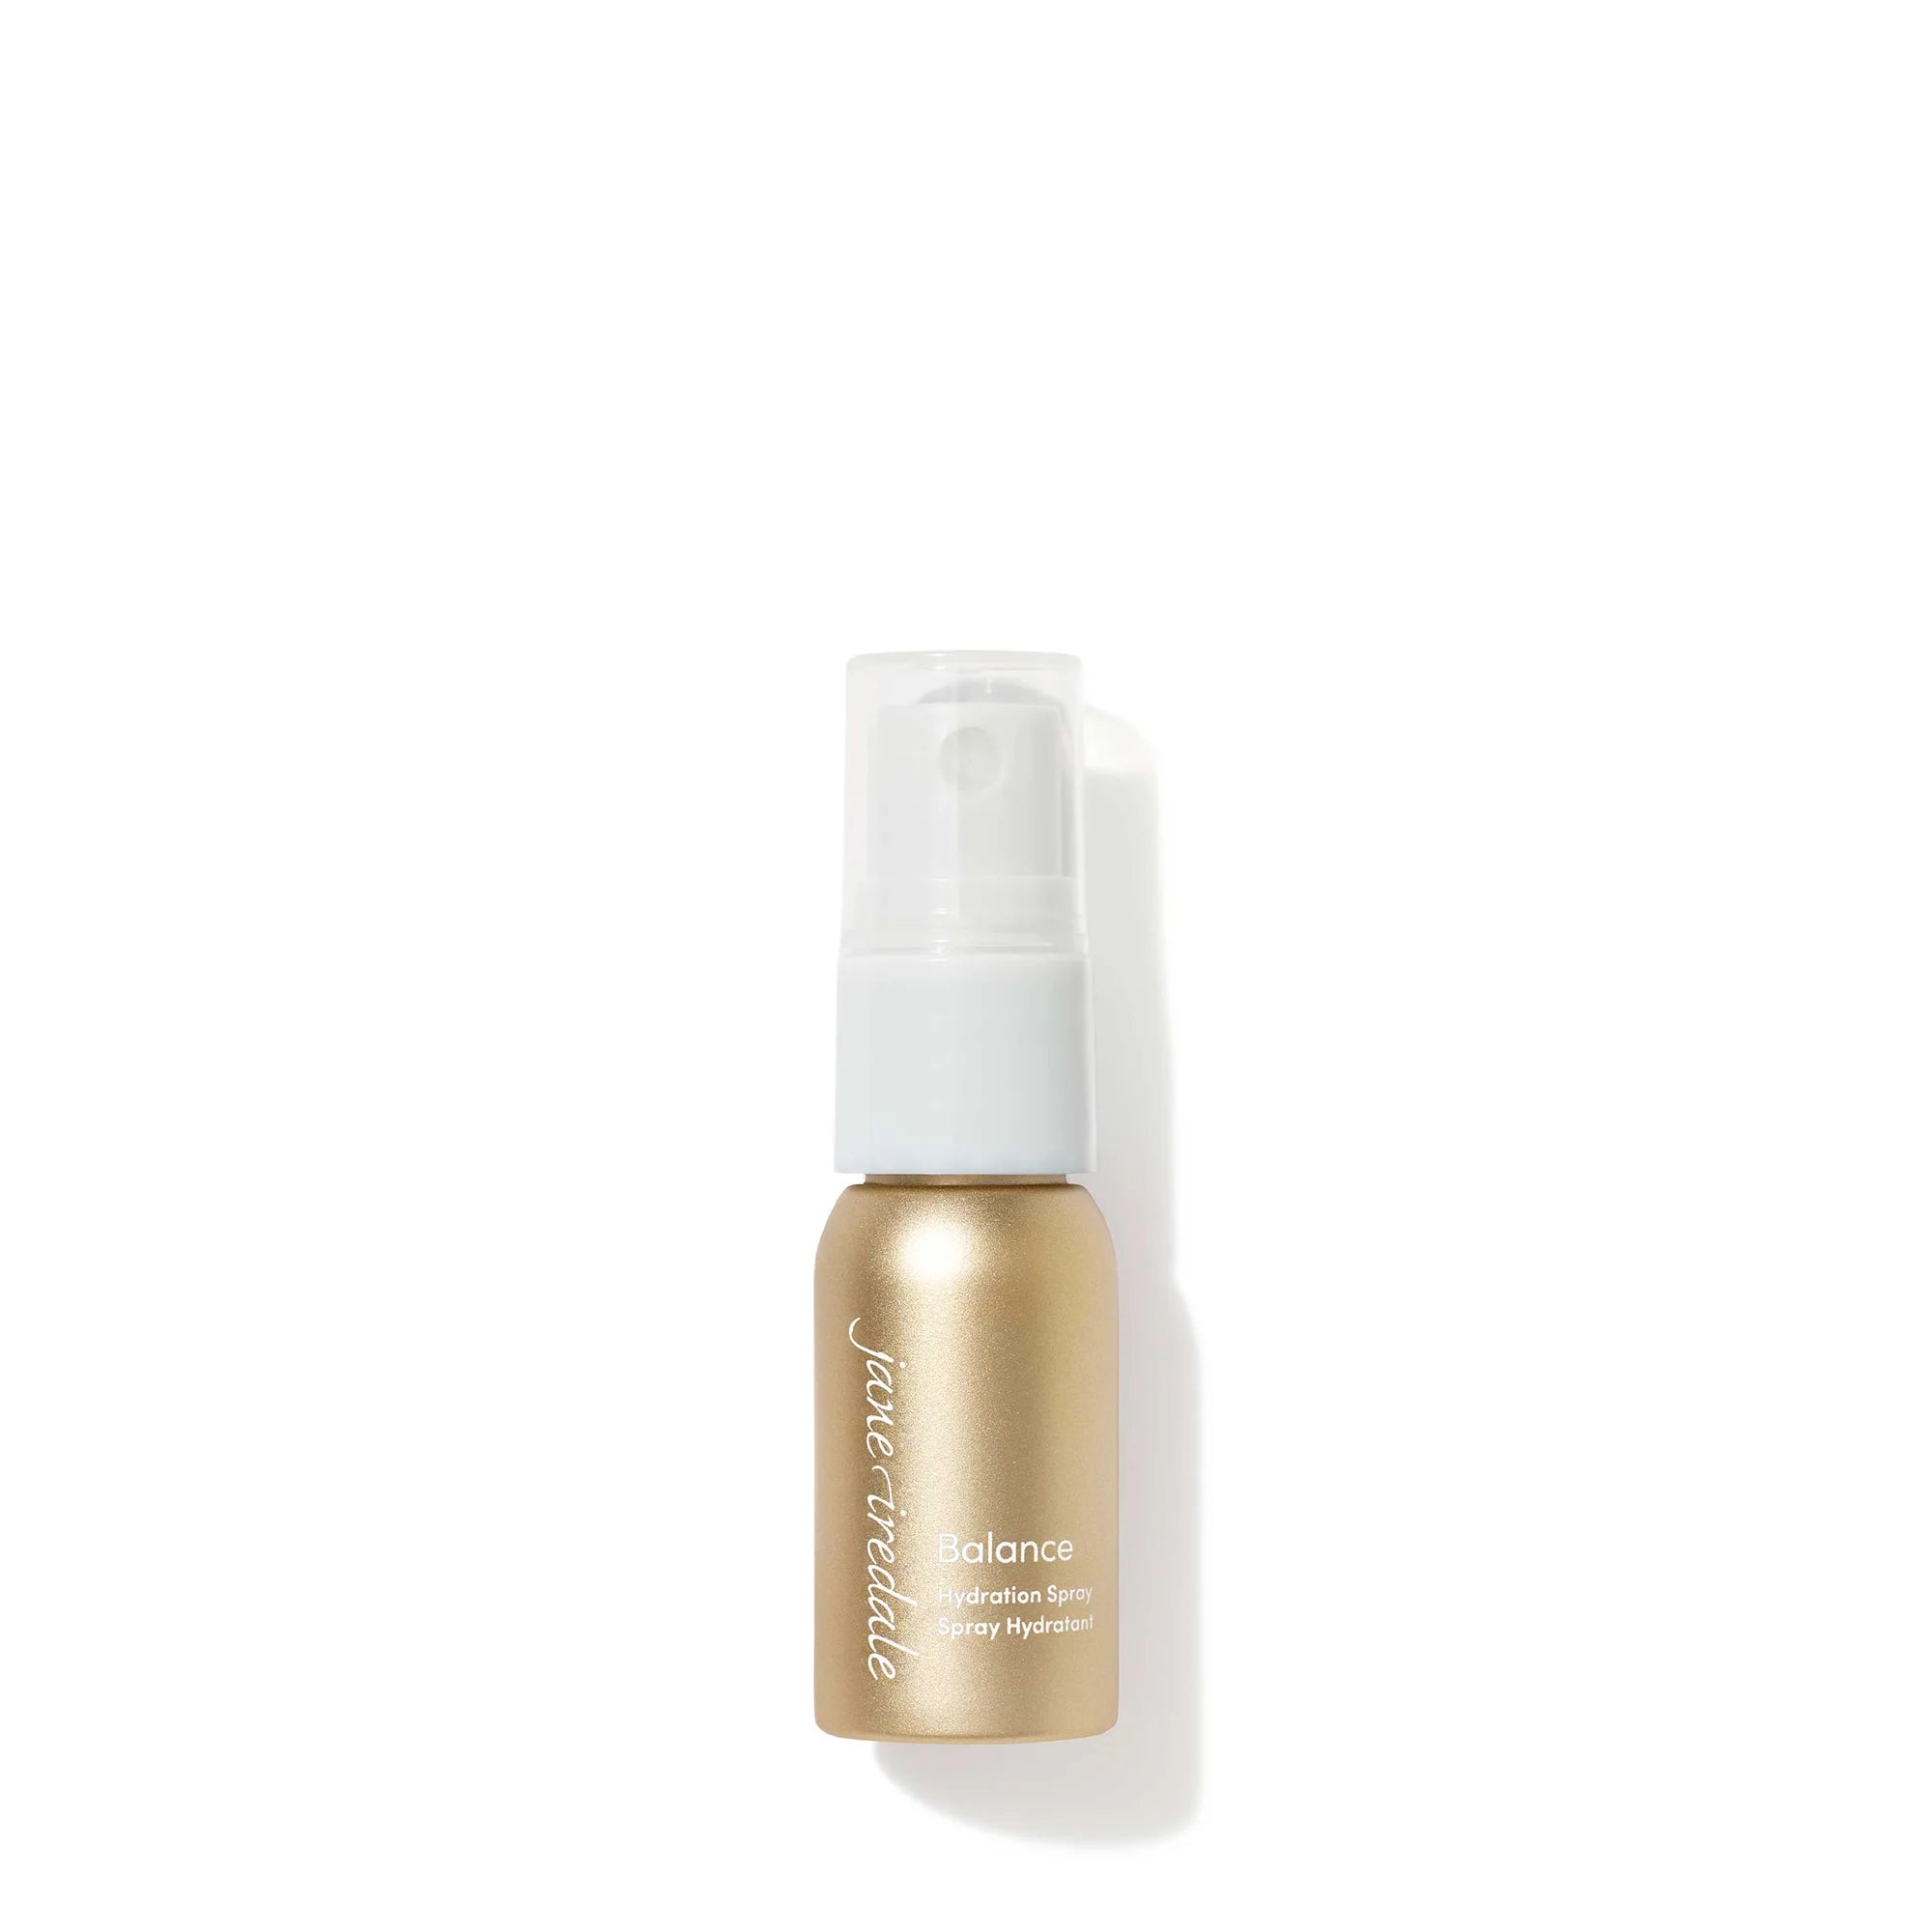 Jane Iredale's Balance™ Hydration Spray 12 ml - Use to set mineral makeup foundation for a long-lasting, smooth finish